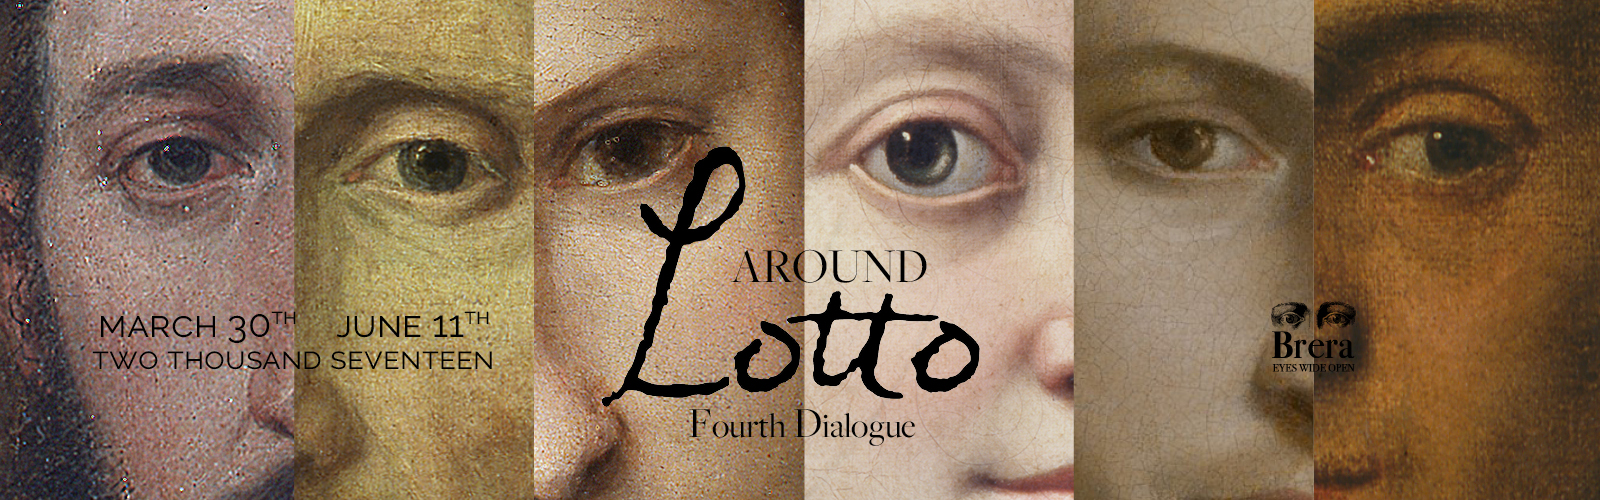 Fourth Dialogue “Around Lotto” | Video Teaser